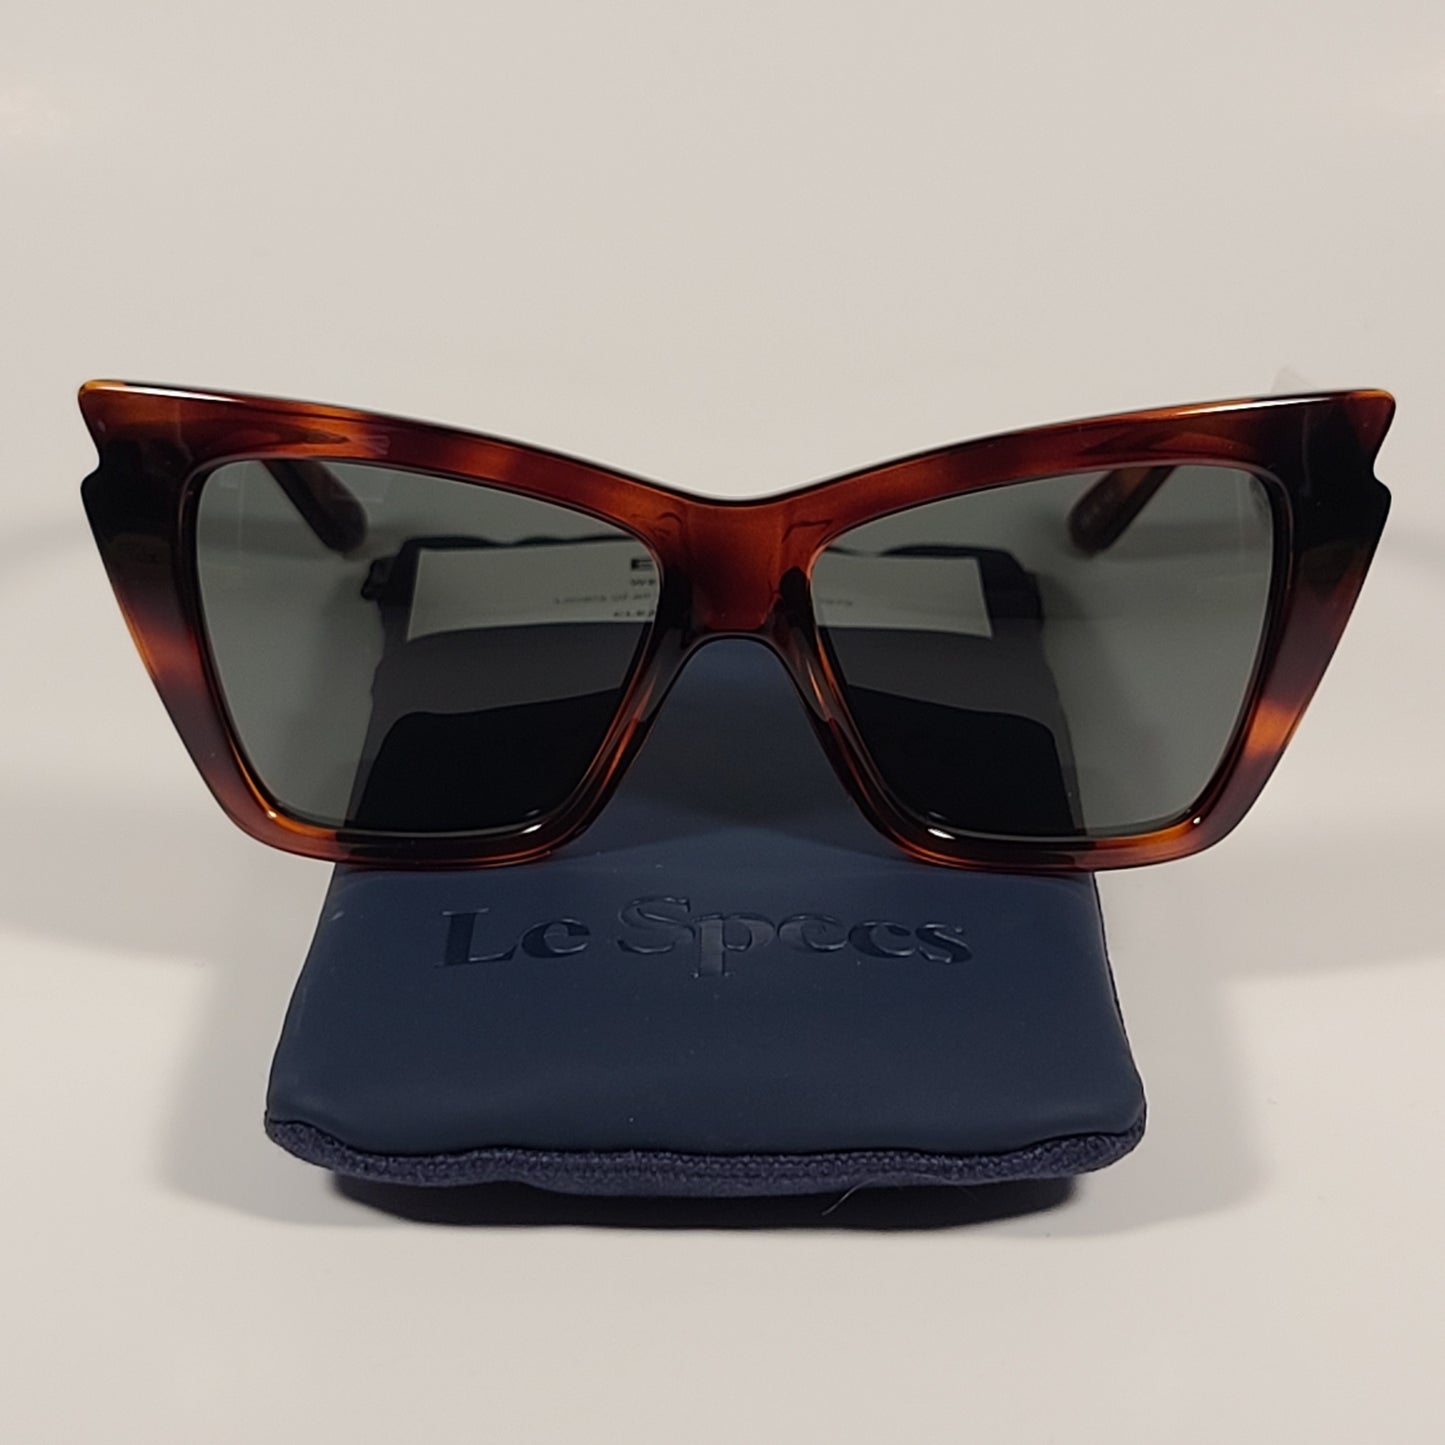 Le Specs Rapture Cat Eye Sunglasses Toffee Tortoise Frame Green Gray Solid Lens LSP2002216 - Sunglasses